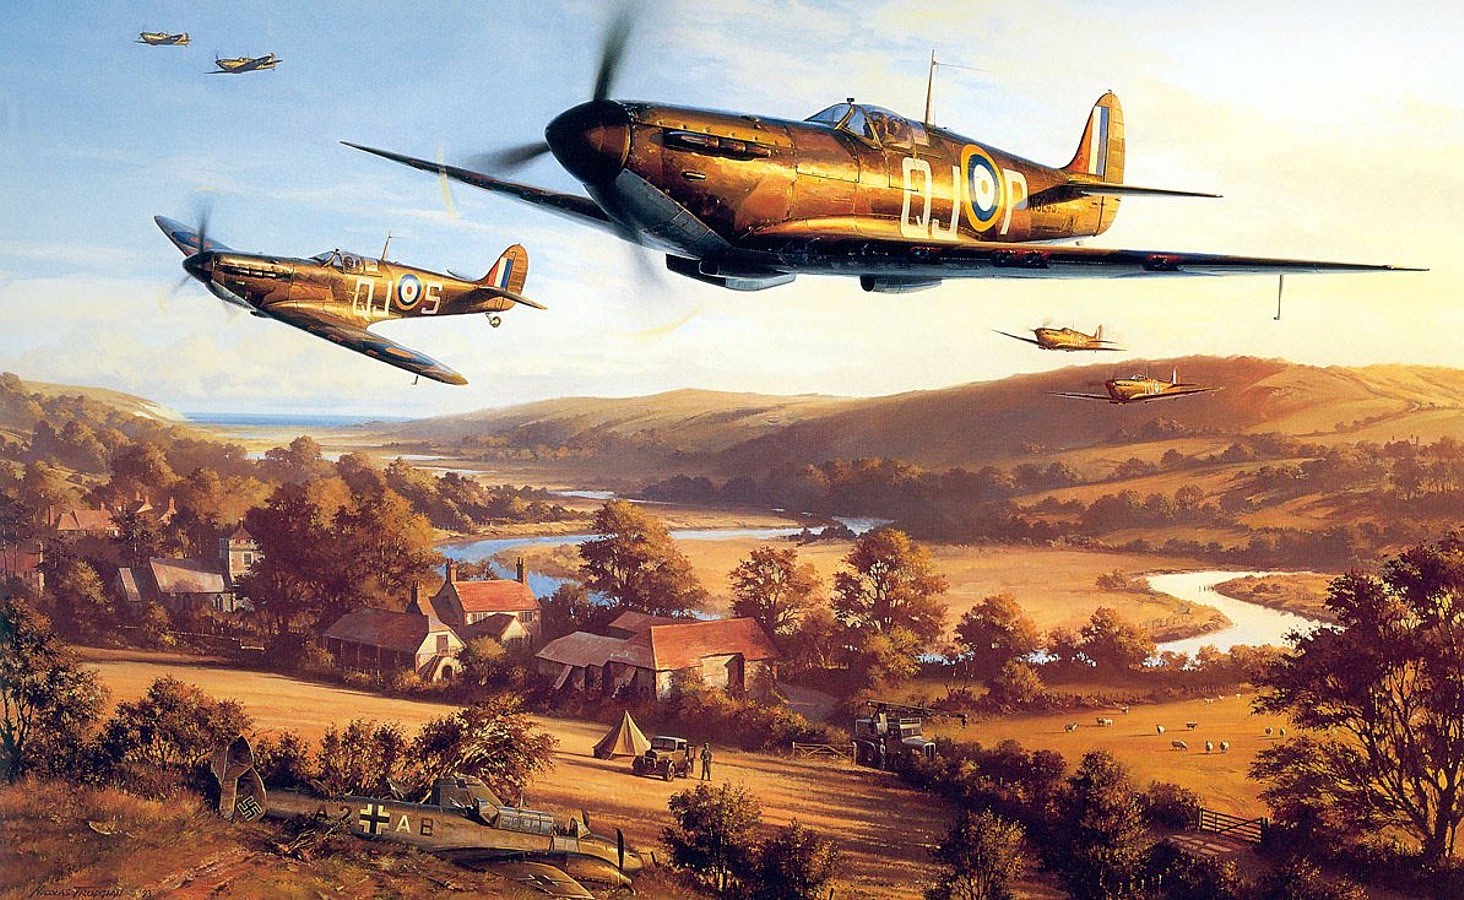 Nice Images Collection - Battle Of Britain Artwork - HD Wallpaper 